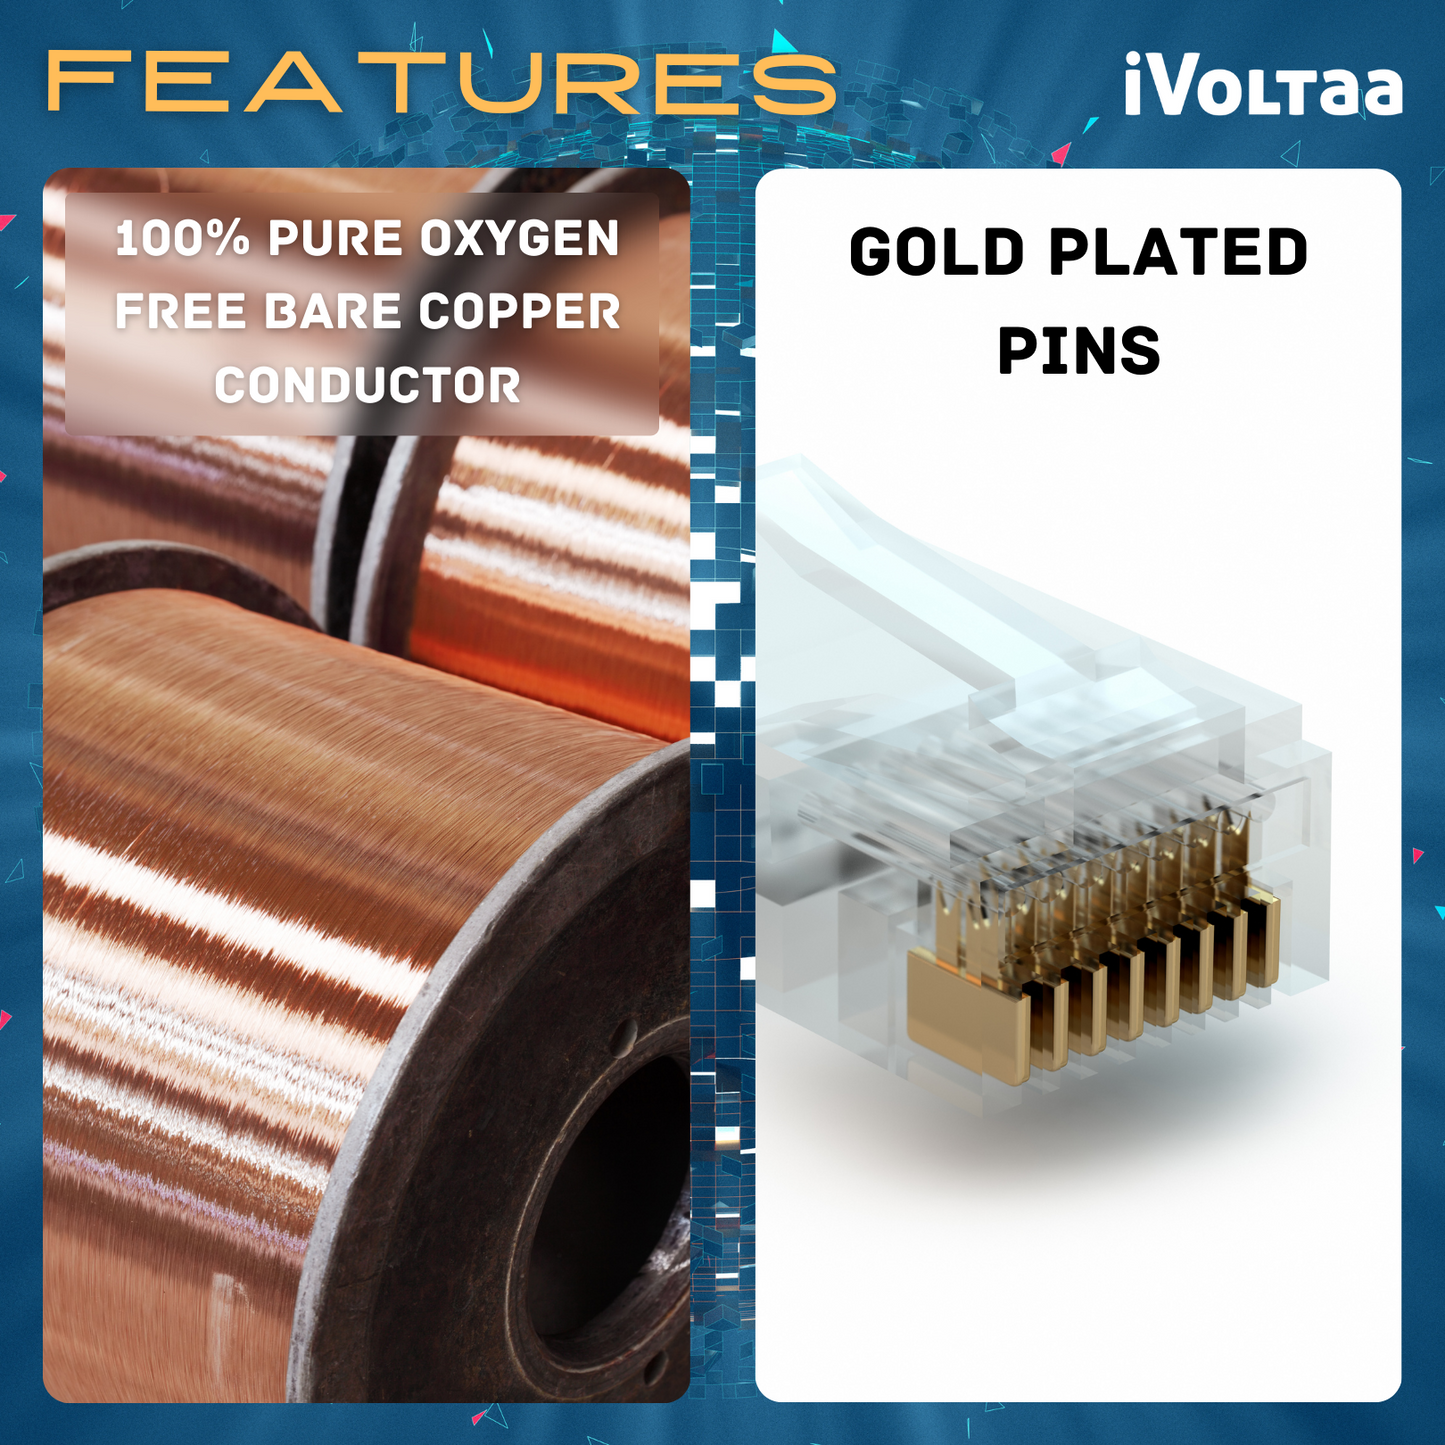 Conductors are made of oxygen free bare copper. RJ45 connectors are gold plated.